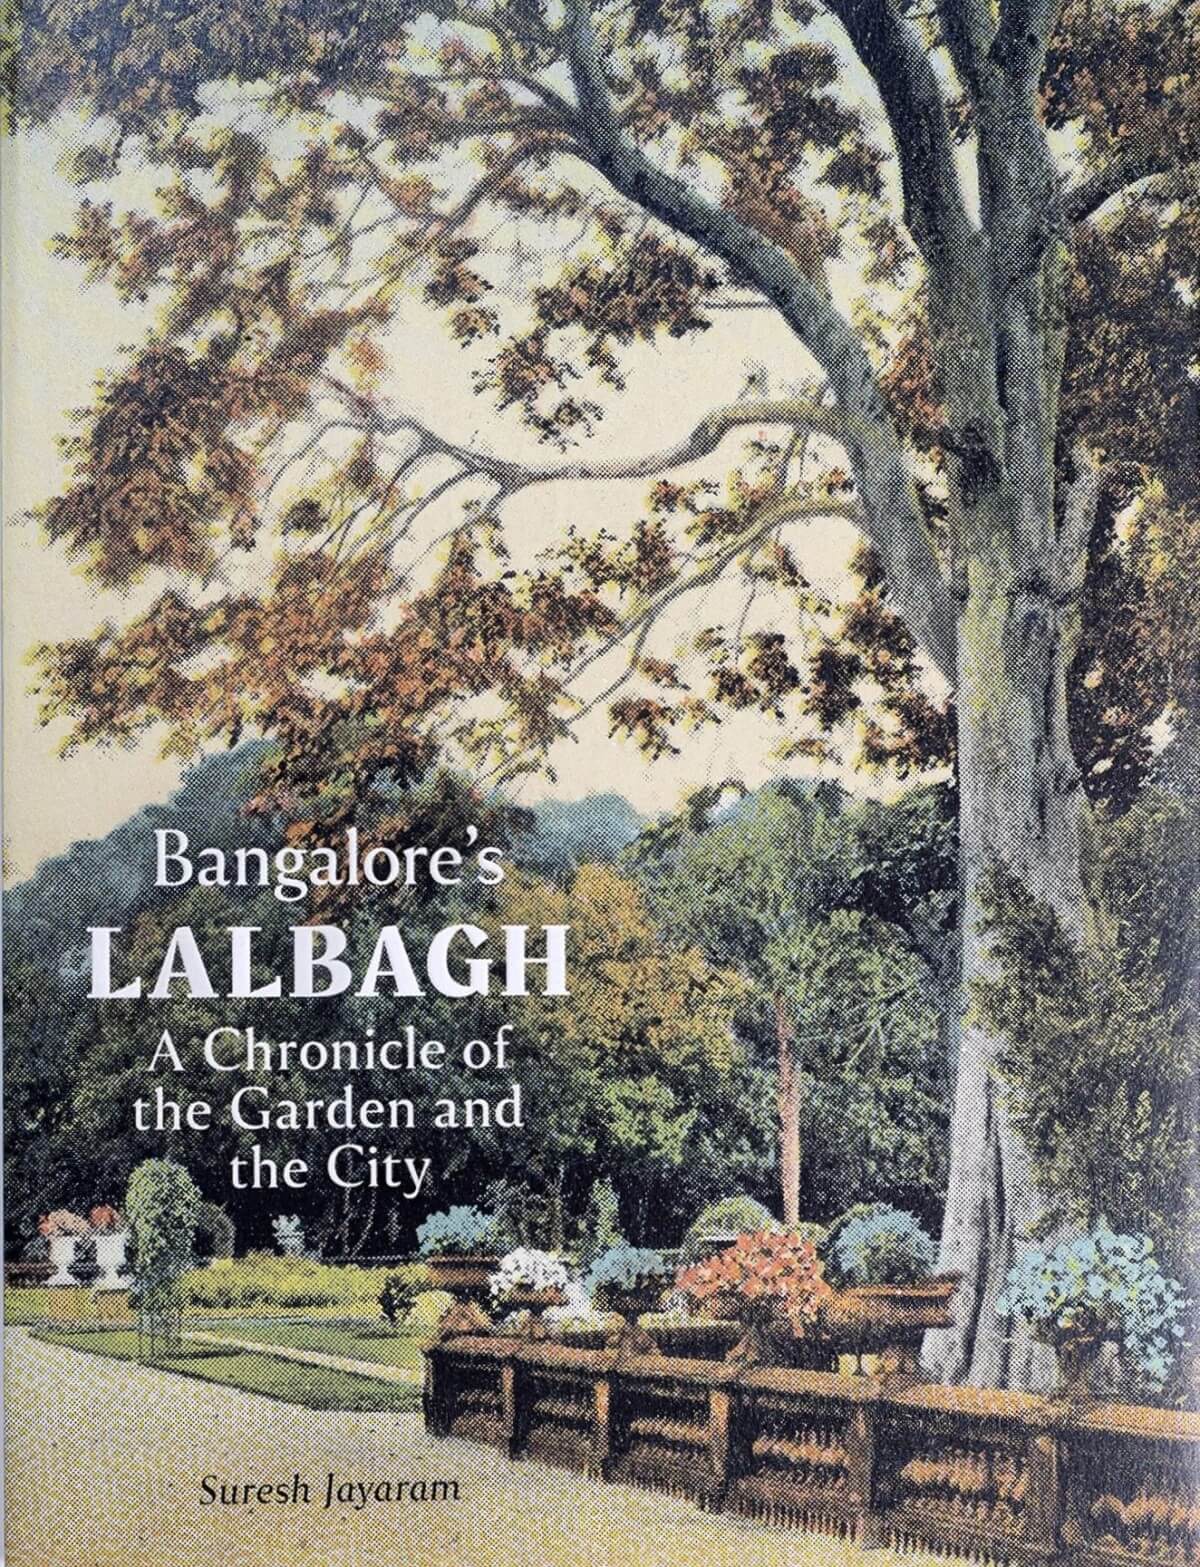 Bangalore's Lalbagh: A Chronicle of the Garden and the City